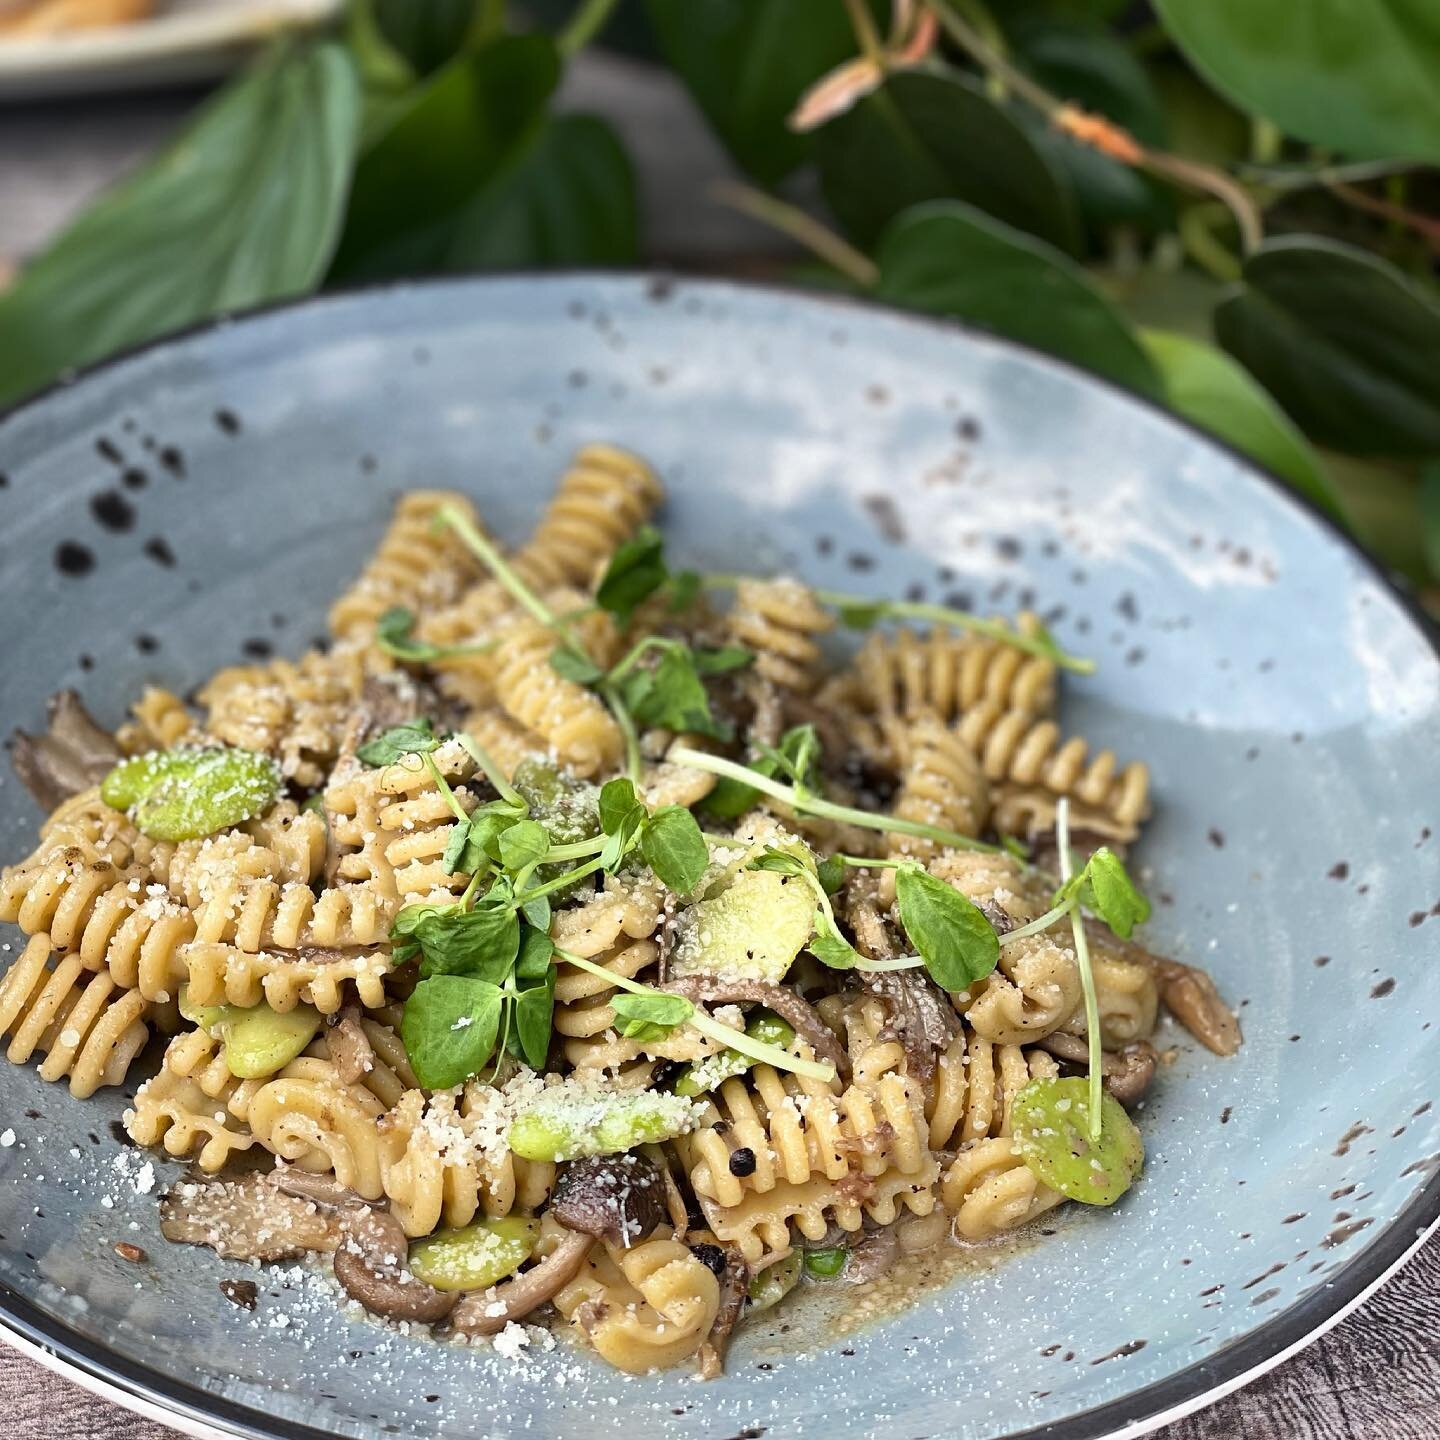 Indulge your taste buds with Summer&rsquo;s bounty, featuring the best &amp; the brightest. Come check out summer menu! 

Radiatore, Fava Beans, Local Mushrooms, Szechuan Peppercorn

#stoneacre #newportri #pasta #brasserie #eatlocal #delicieuse 
#fam